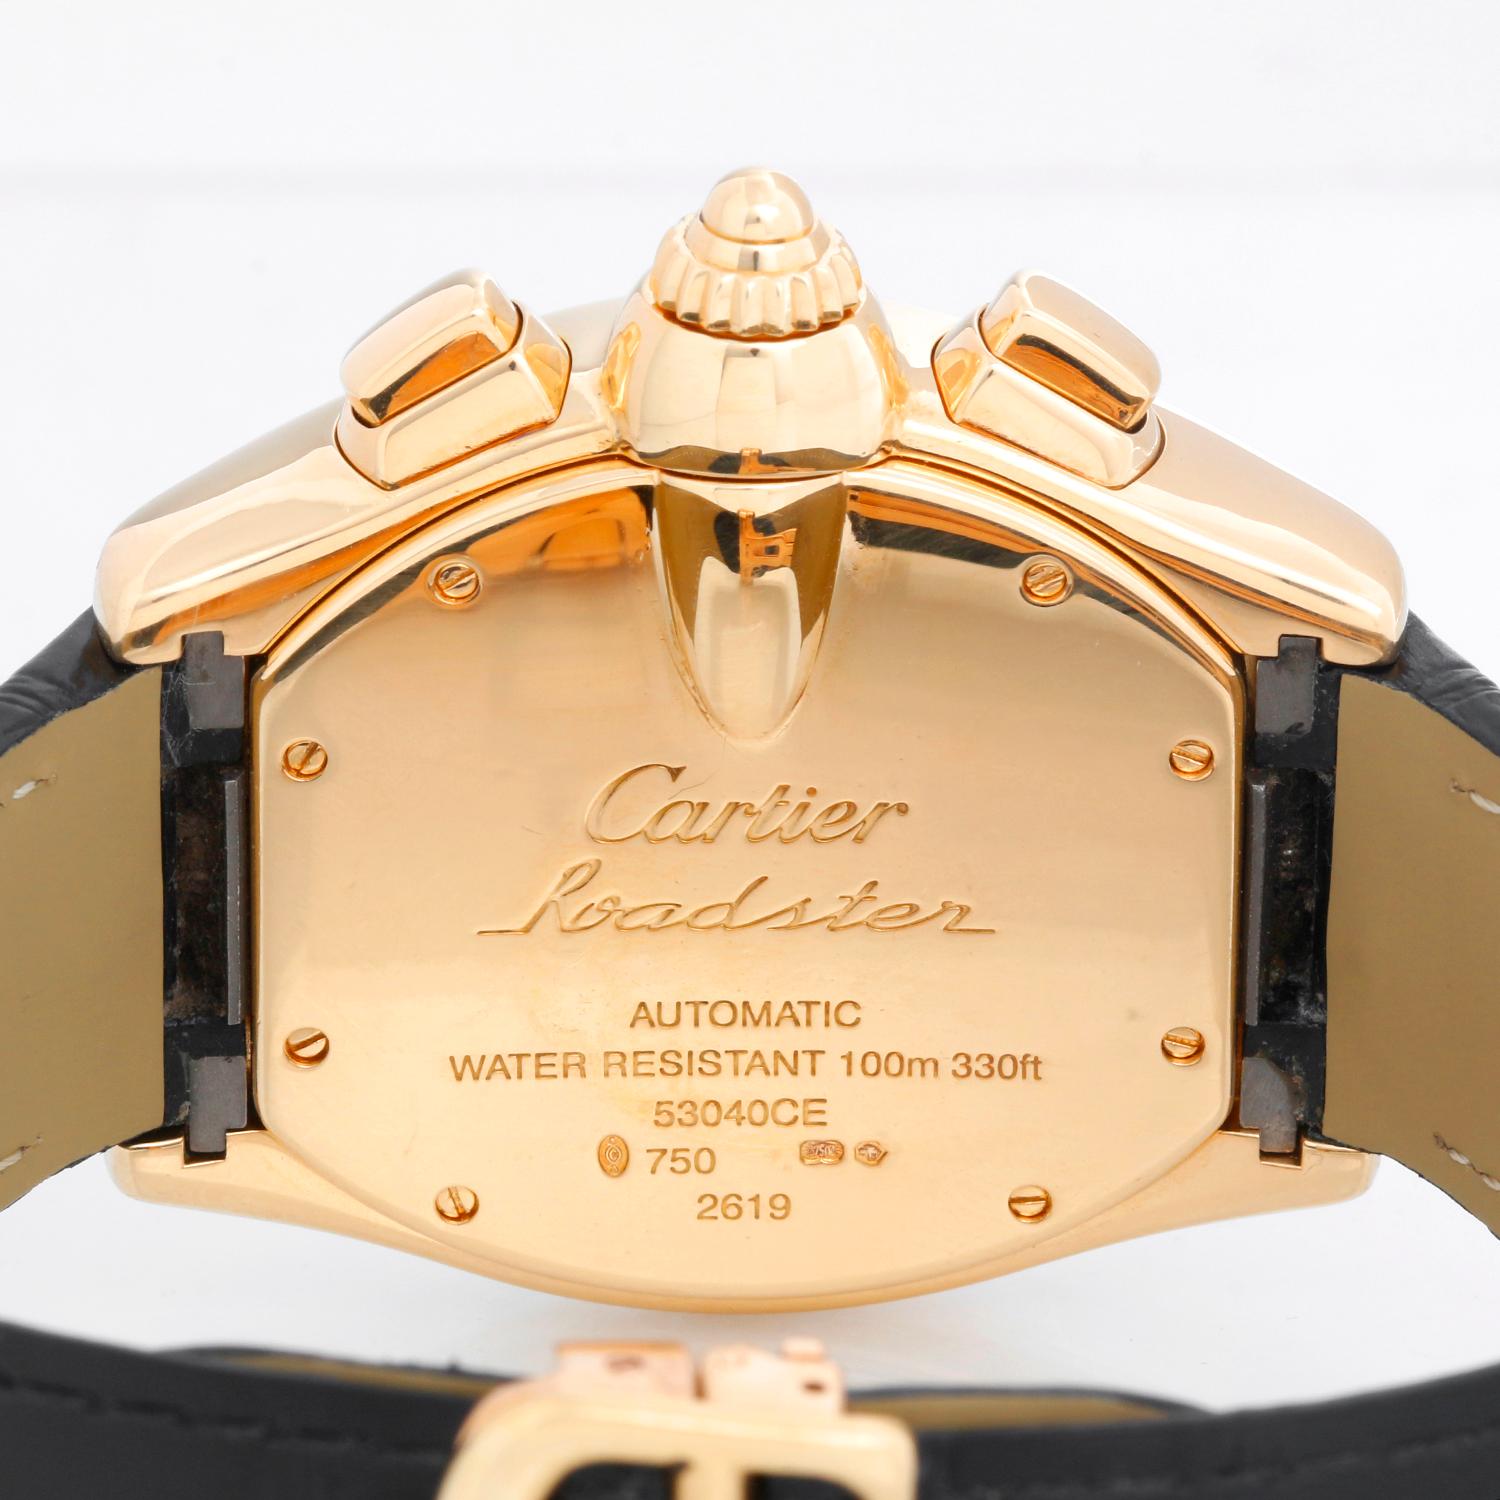 Cartier Roadster Chronograph XL 18k Yellow Gold Men's Watch 2619 In Excellent Condition In Dallas, TX